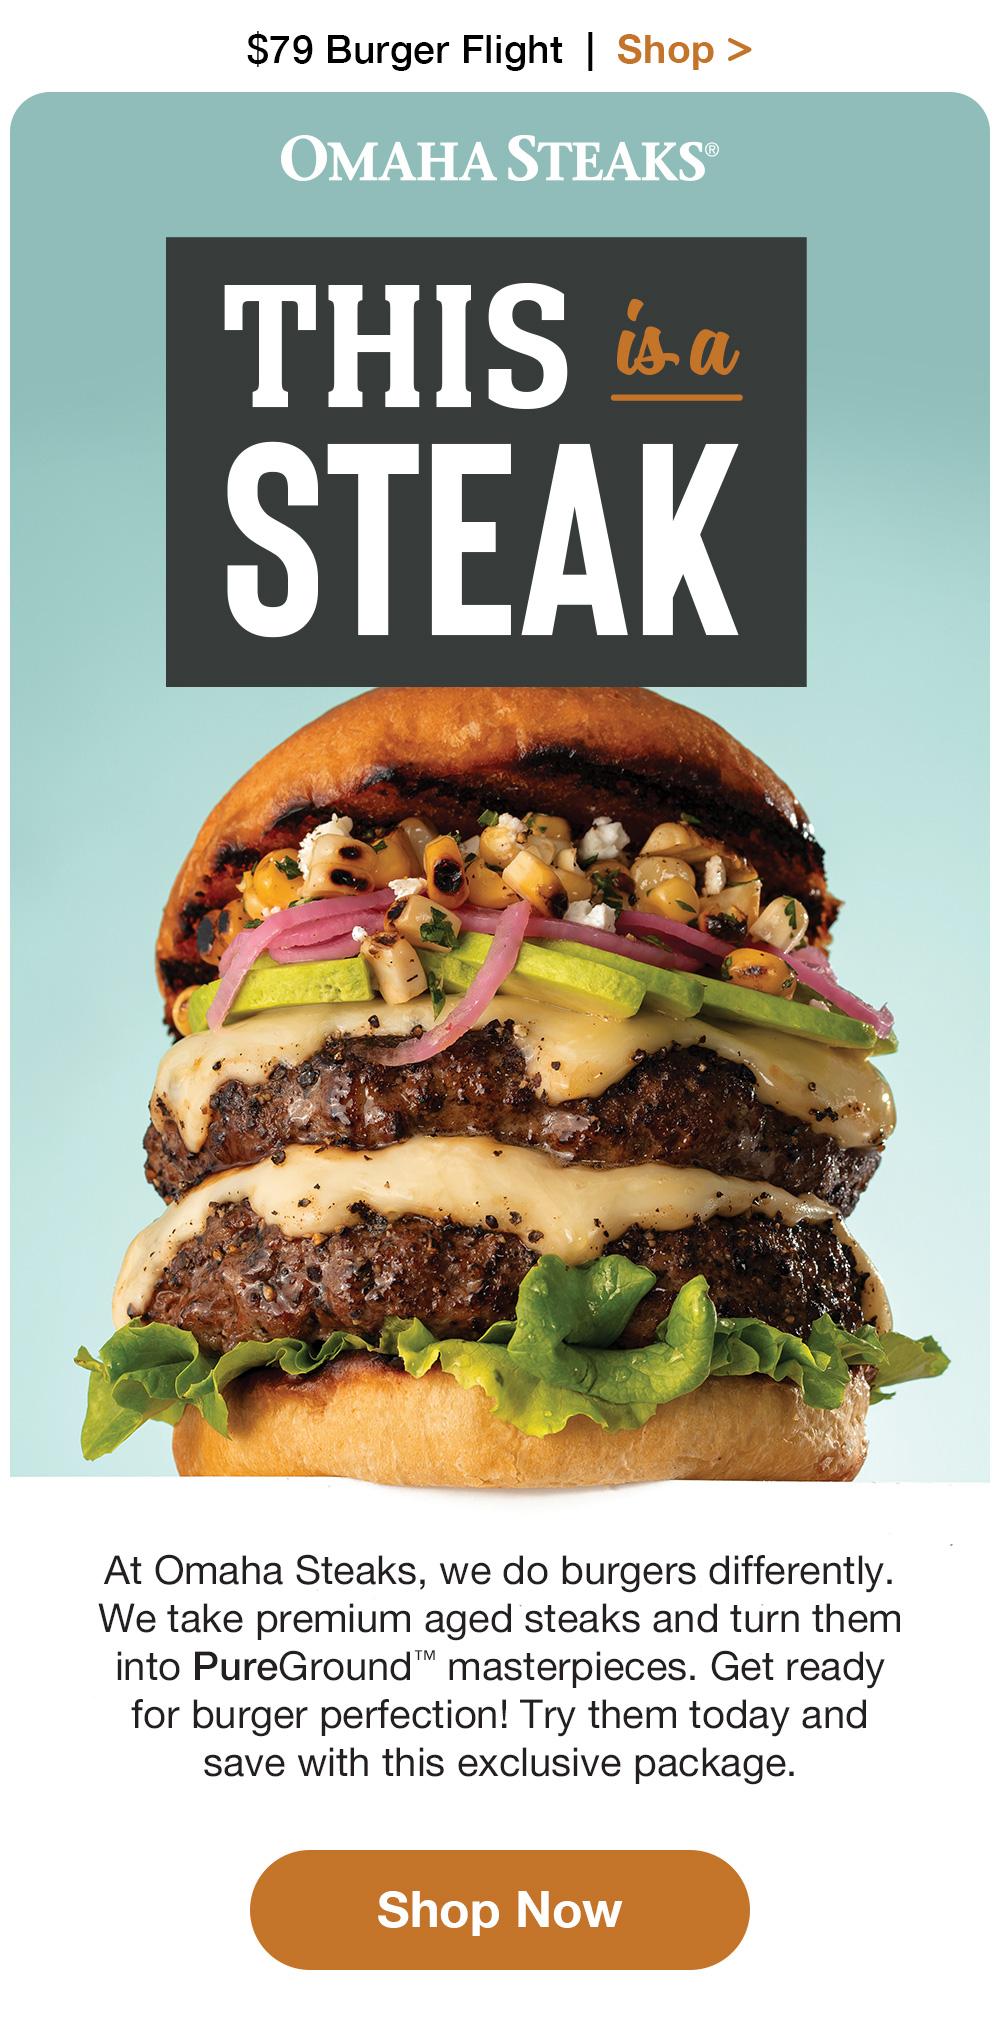 $79 Burger Flight + Free Shipping | Shop >  OMAHA STEAKS® | THIS is a STEAK At Omaha Steaks, we do burgers differently. We take premium aged steaks and turn them into PureGround™ masterpieces. Get ready for burger perfection! Try them today and save with this exclusive package. || Shop Now